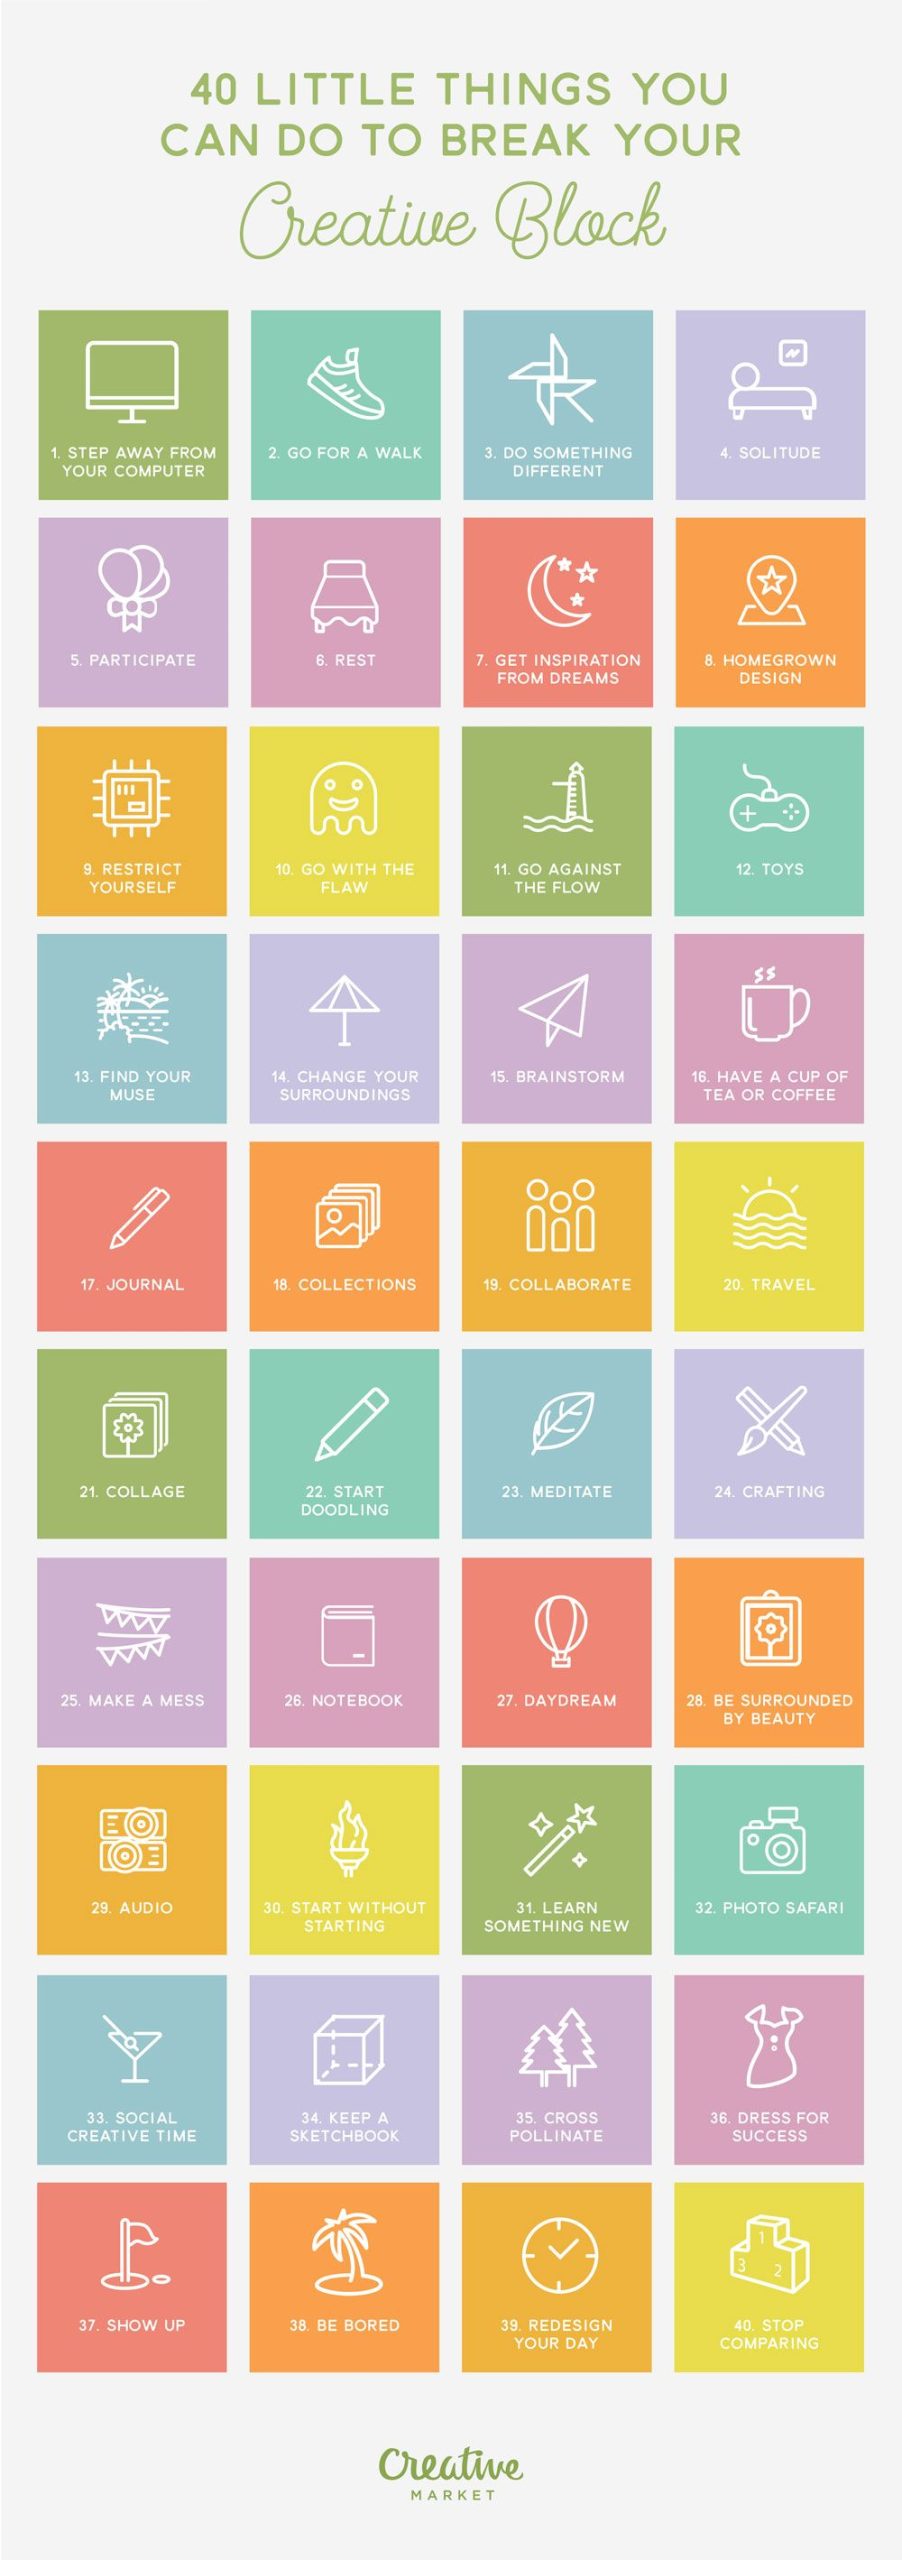 Infographic: 40 Little Things You Can Do to Break Your Creative Block